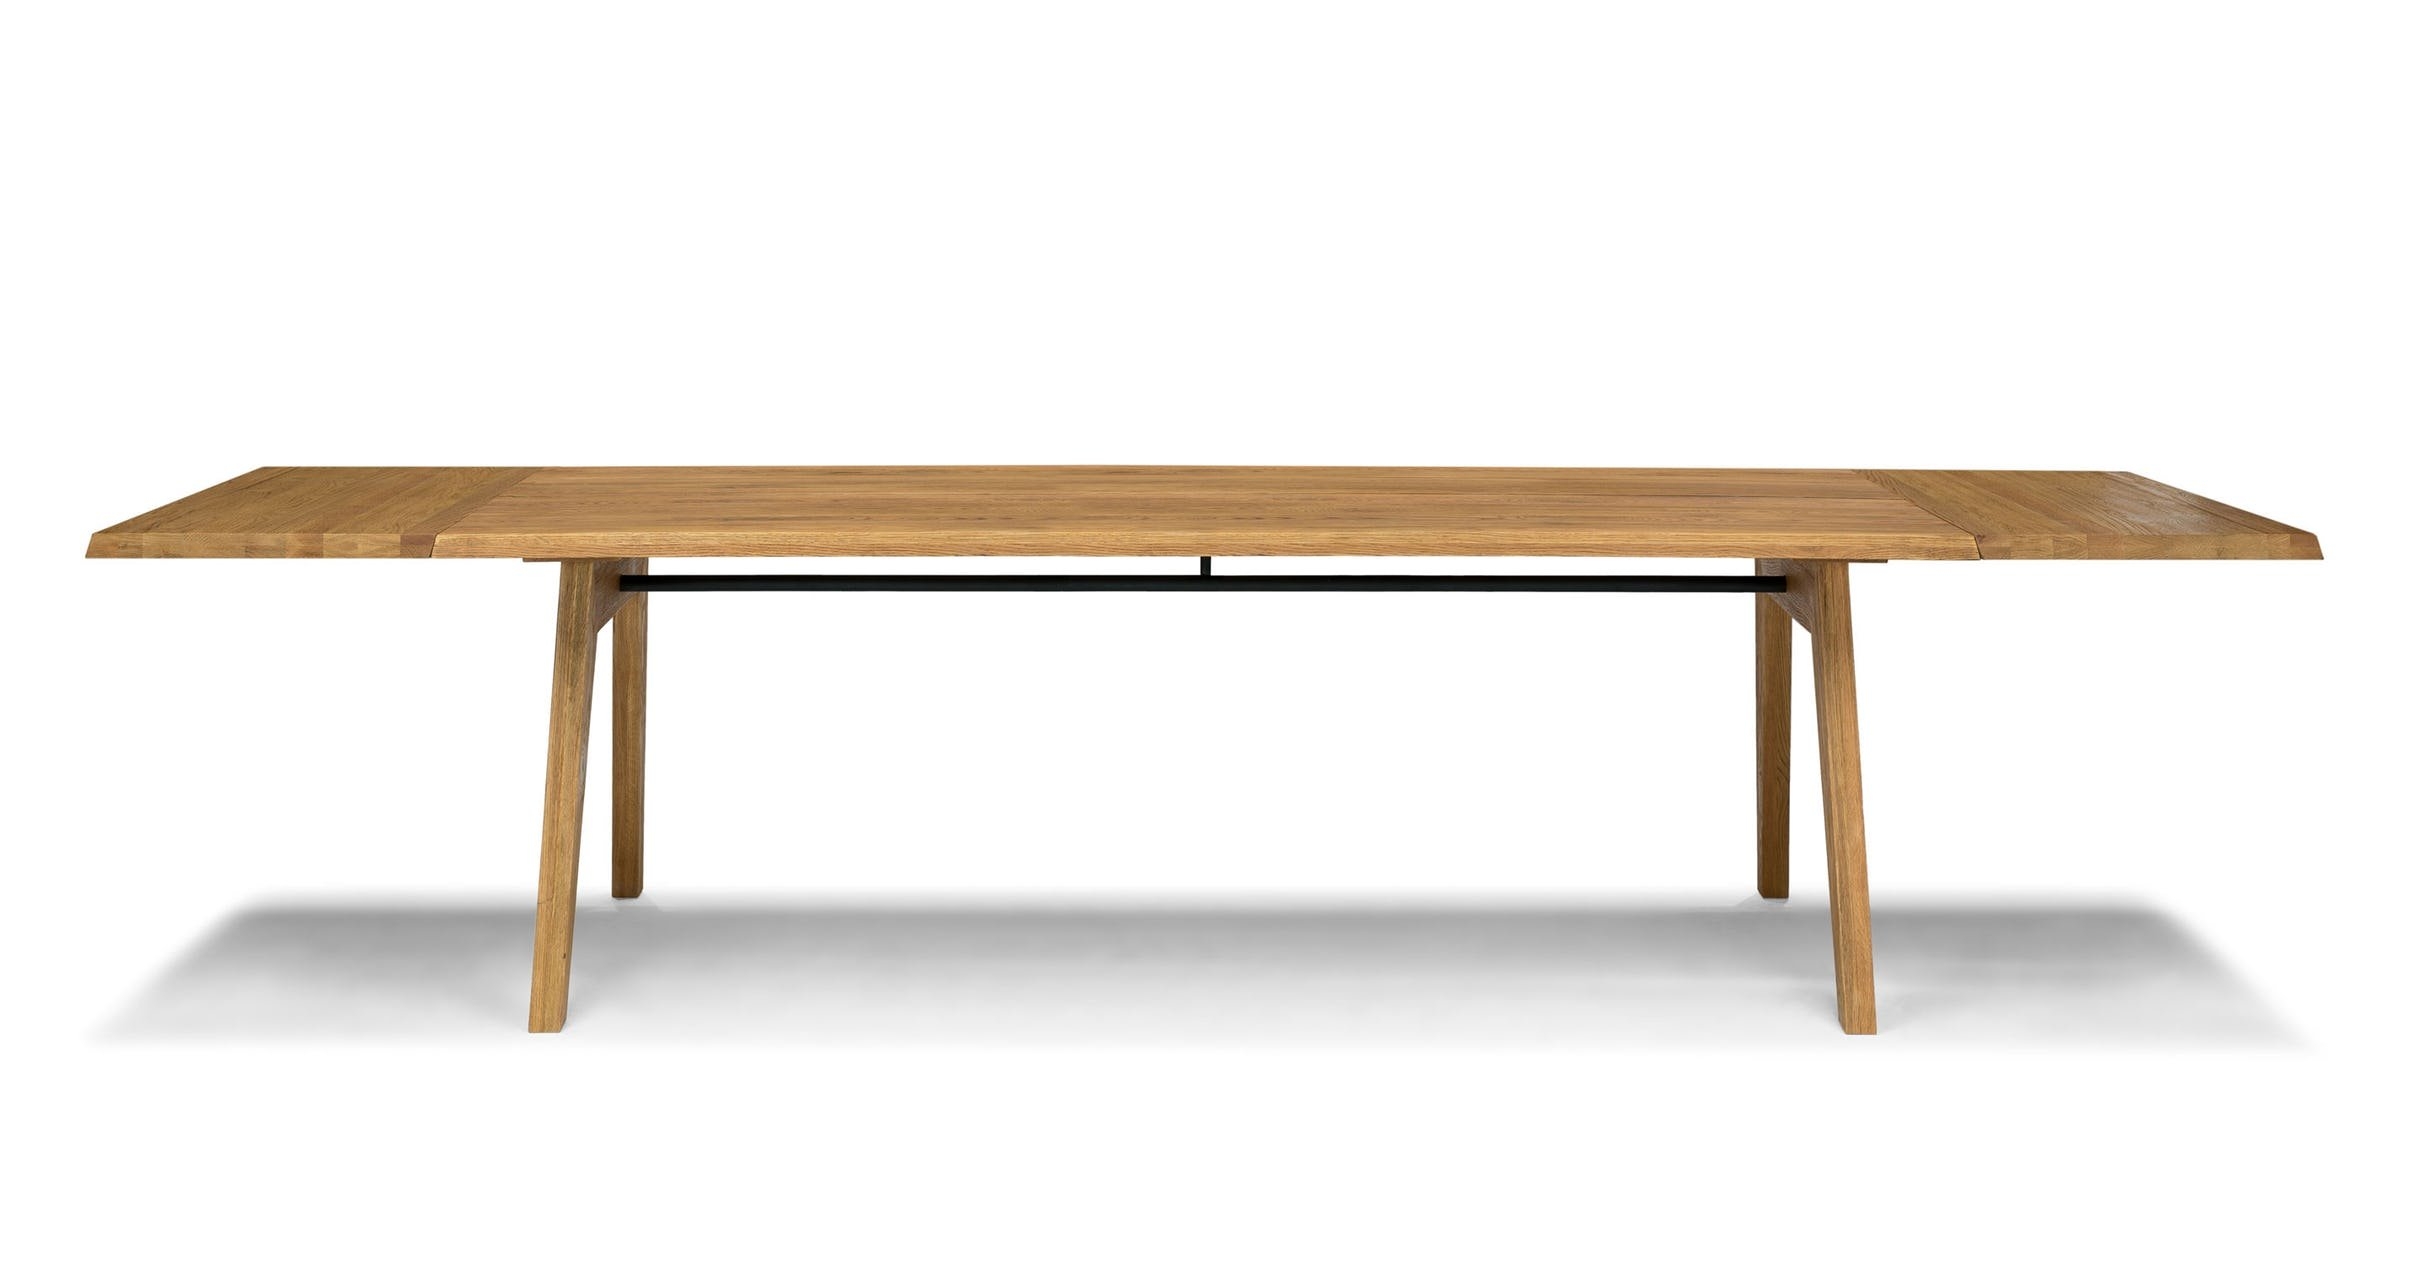 Madera Oak Dining Table, Extendable - Image 1